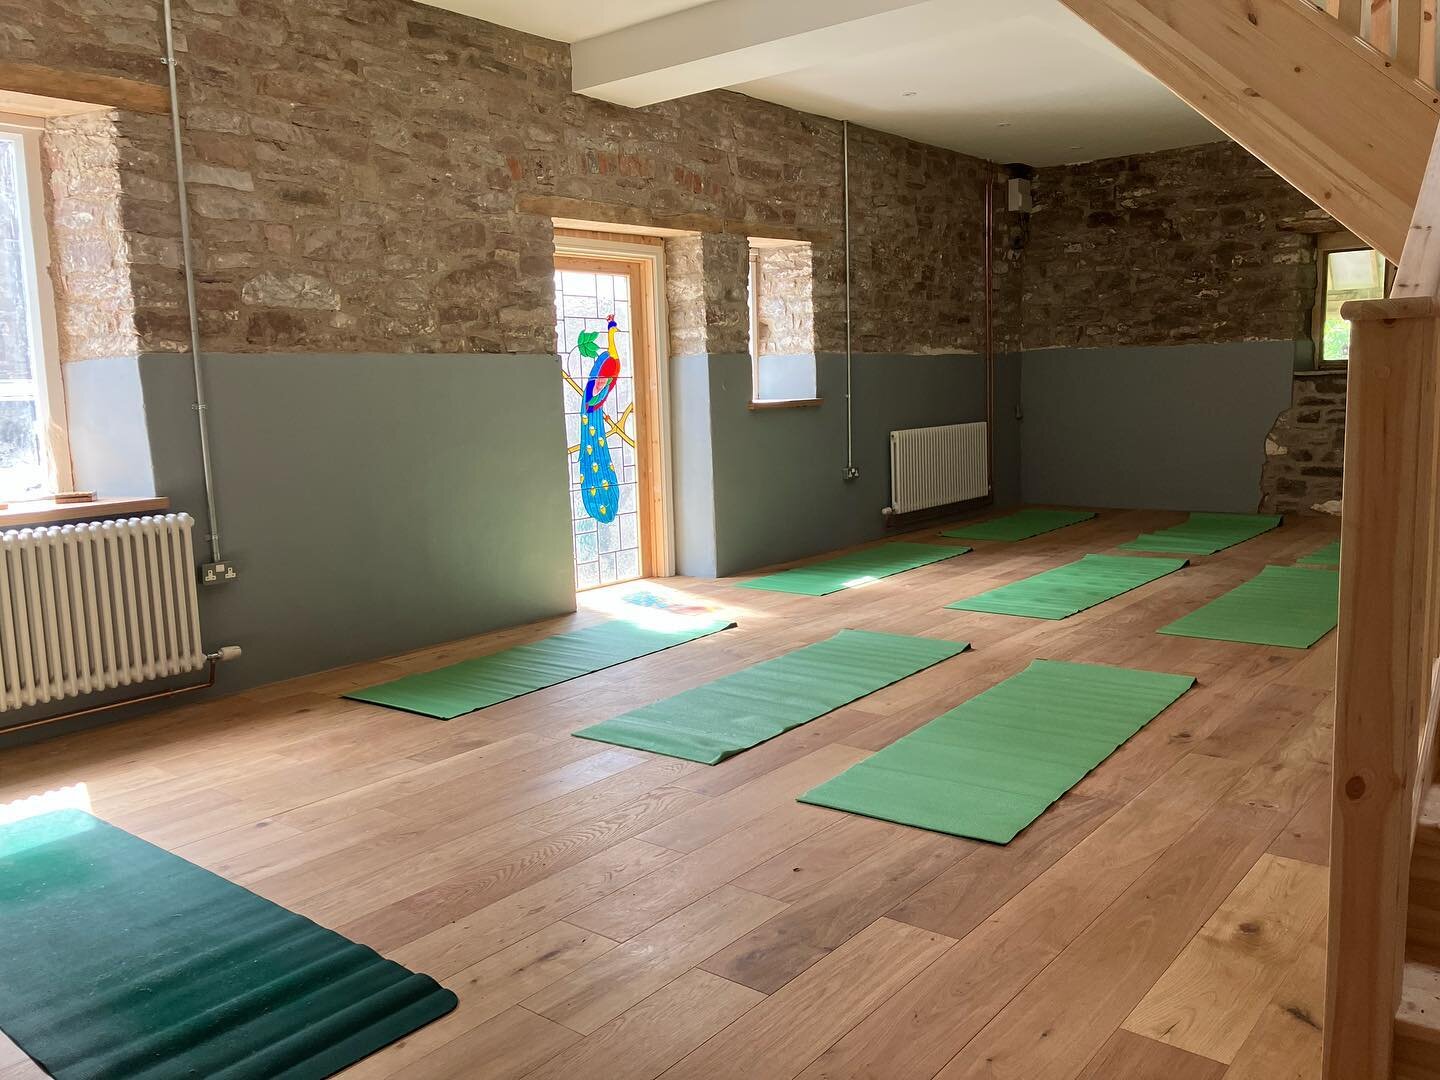 Still some snagging tasks to finish, but we are nearly there with our beautiful workshop space and the kitchen and toilet/shower room. So happy to have used the yoga space for the first time this weekend!
.
.
#retreatcentre #yogaretreat #yogaretreats